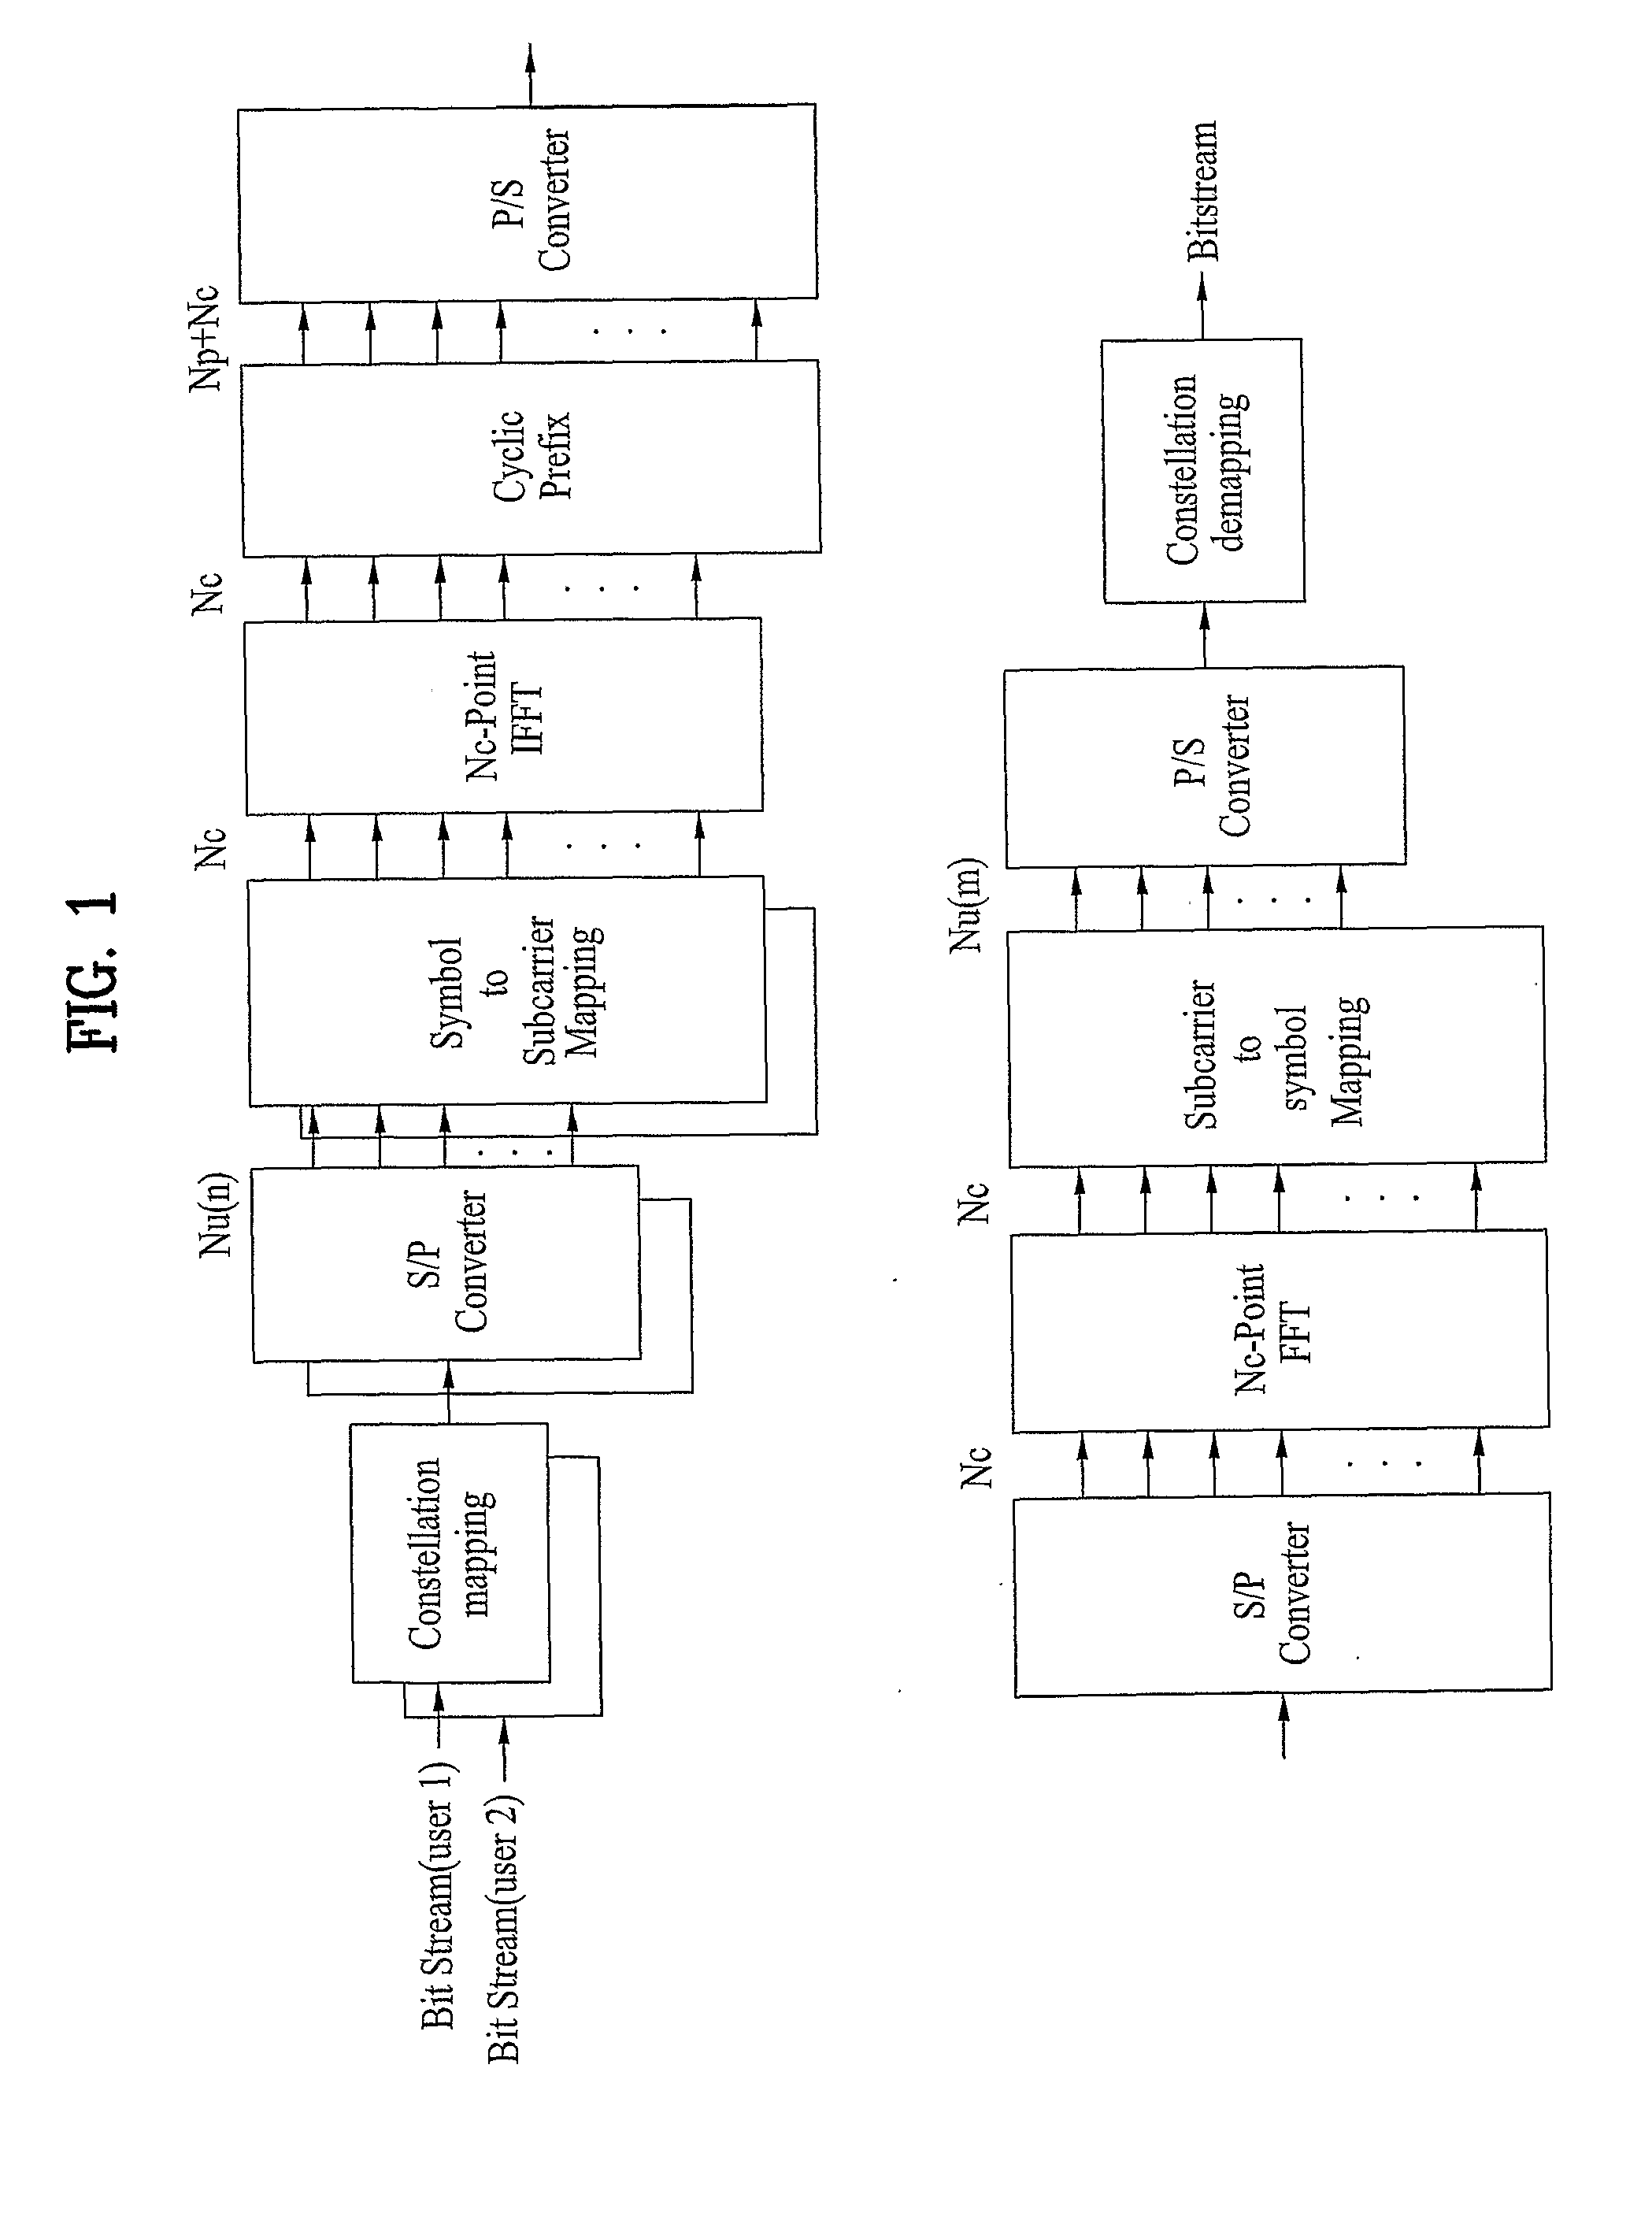 Method for transmitting and receiving data in a multi-carrier system